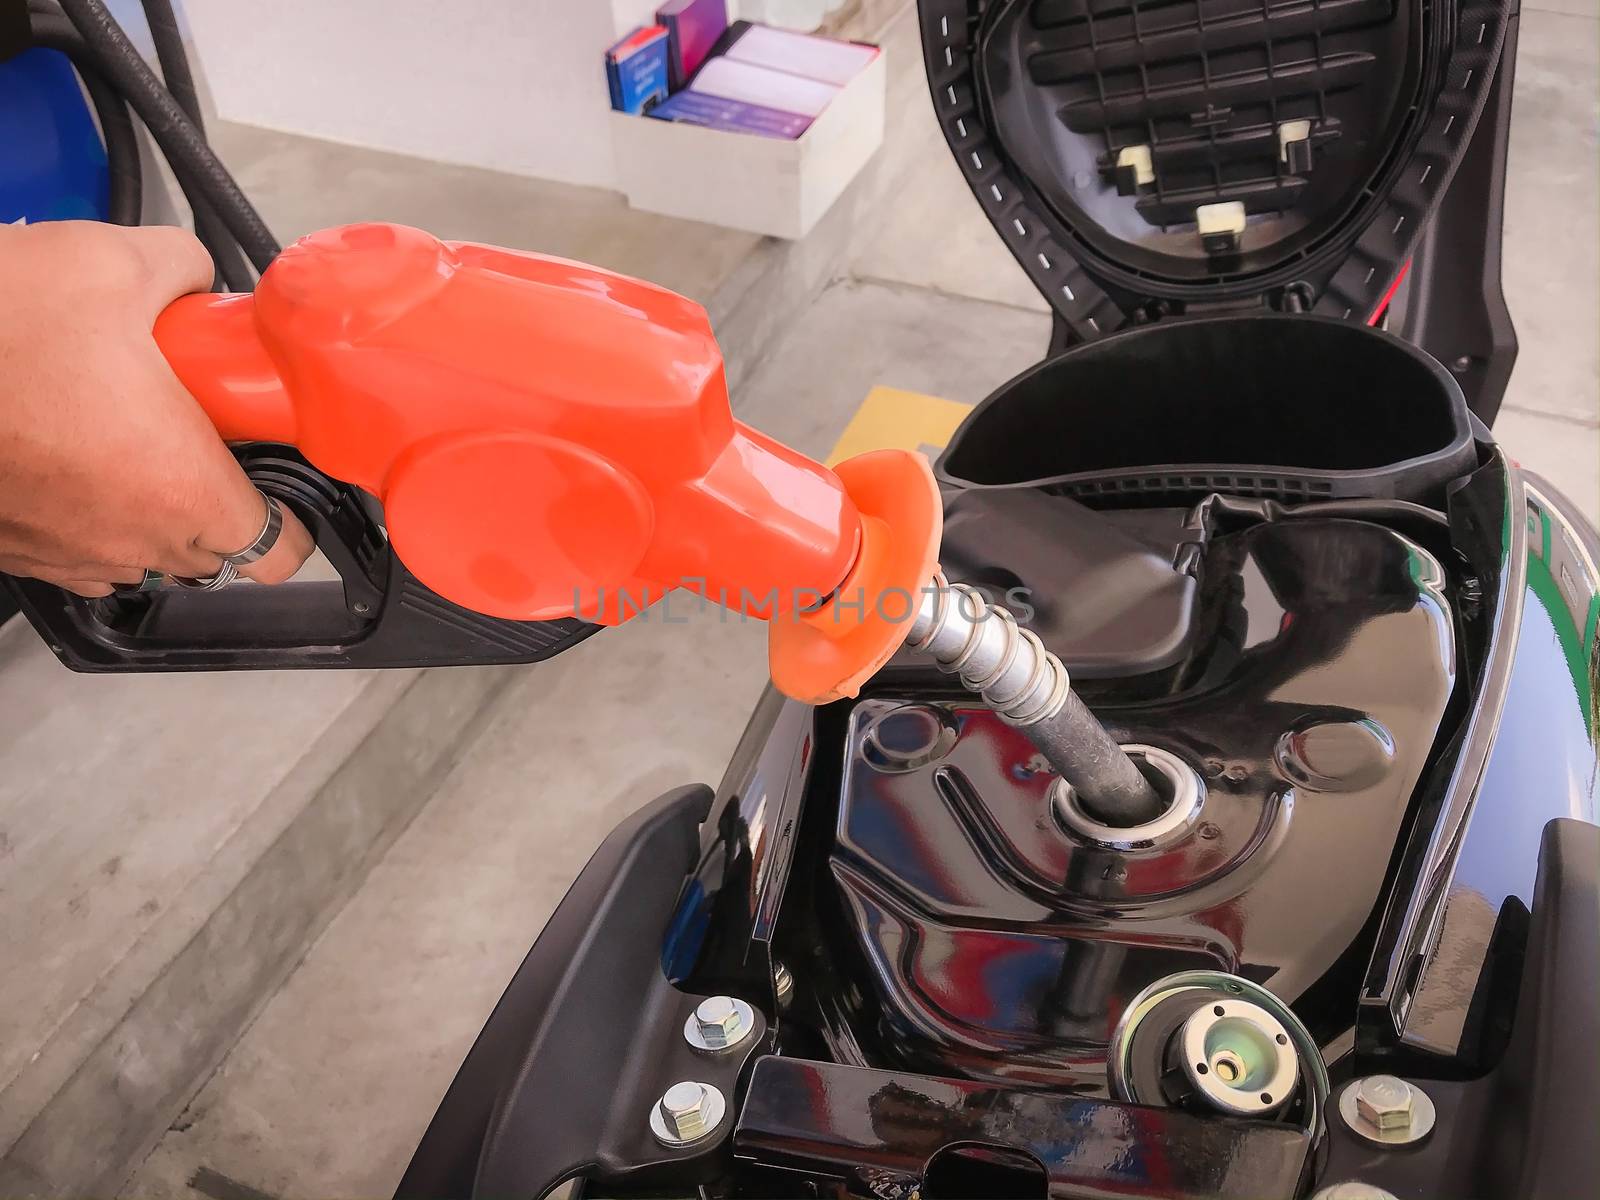 Closeup of the hand of the employee holding the fuel dispenser and adding benzyl fuel to the motorcycle's fuel tank.